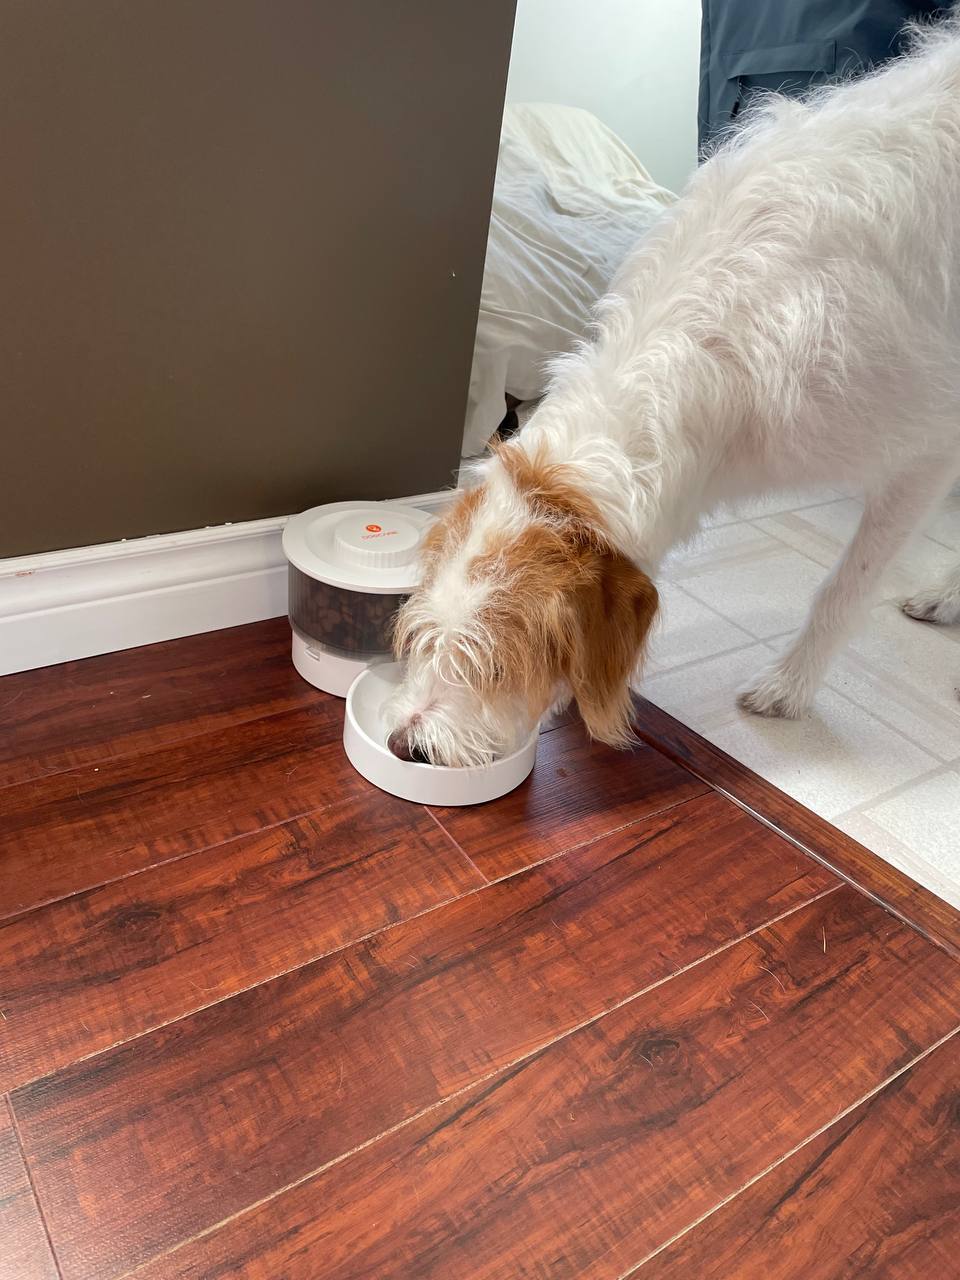 My dog is getting used to Dogcare Automatic Dog Feeder